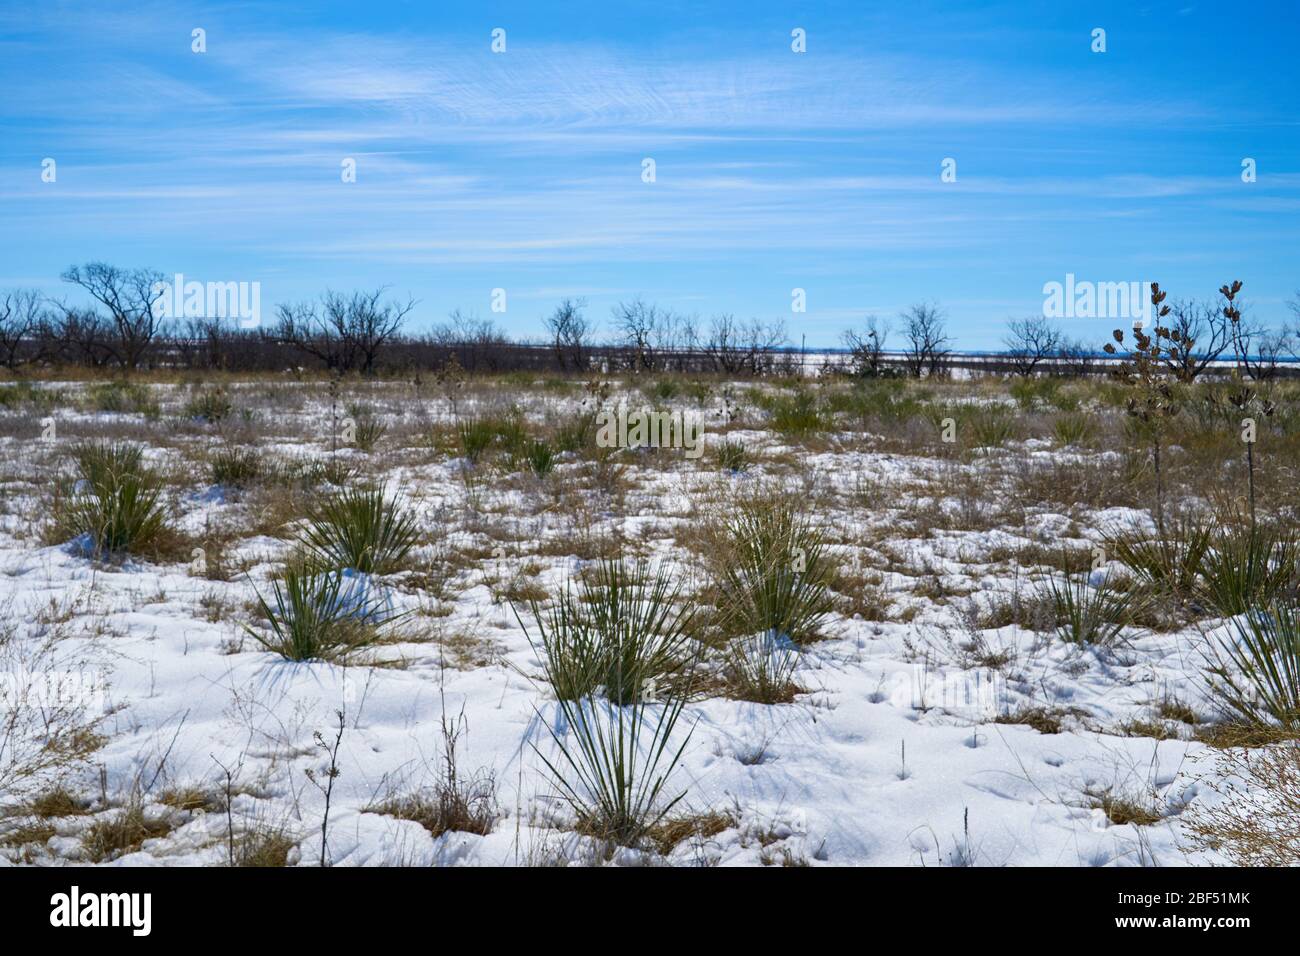 Snow covered desert landscape with Yucca plants in Texas Stock Photo